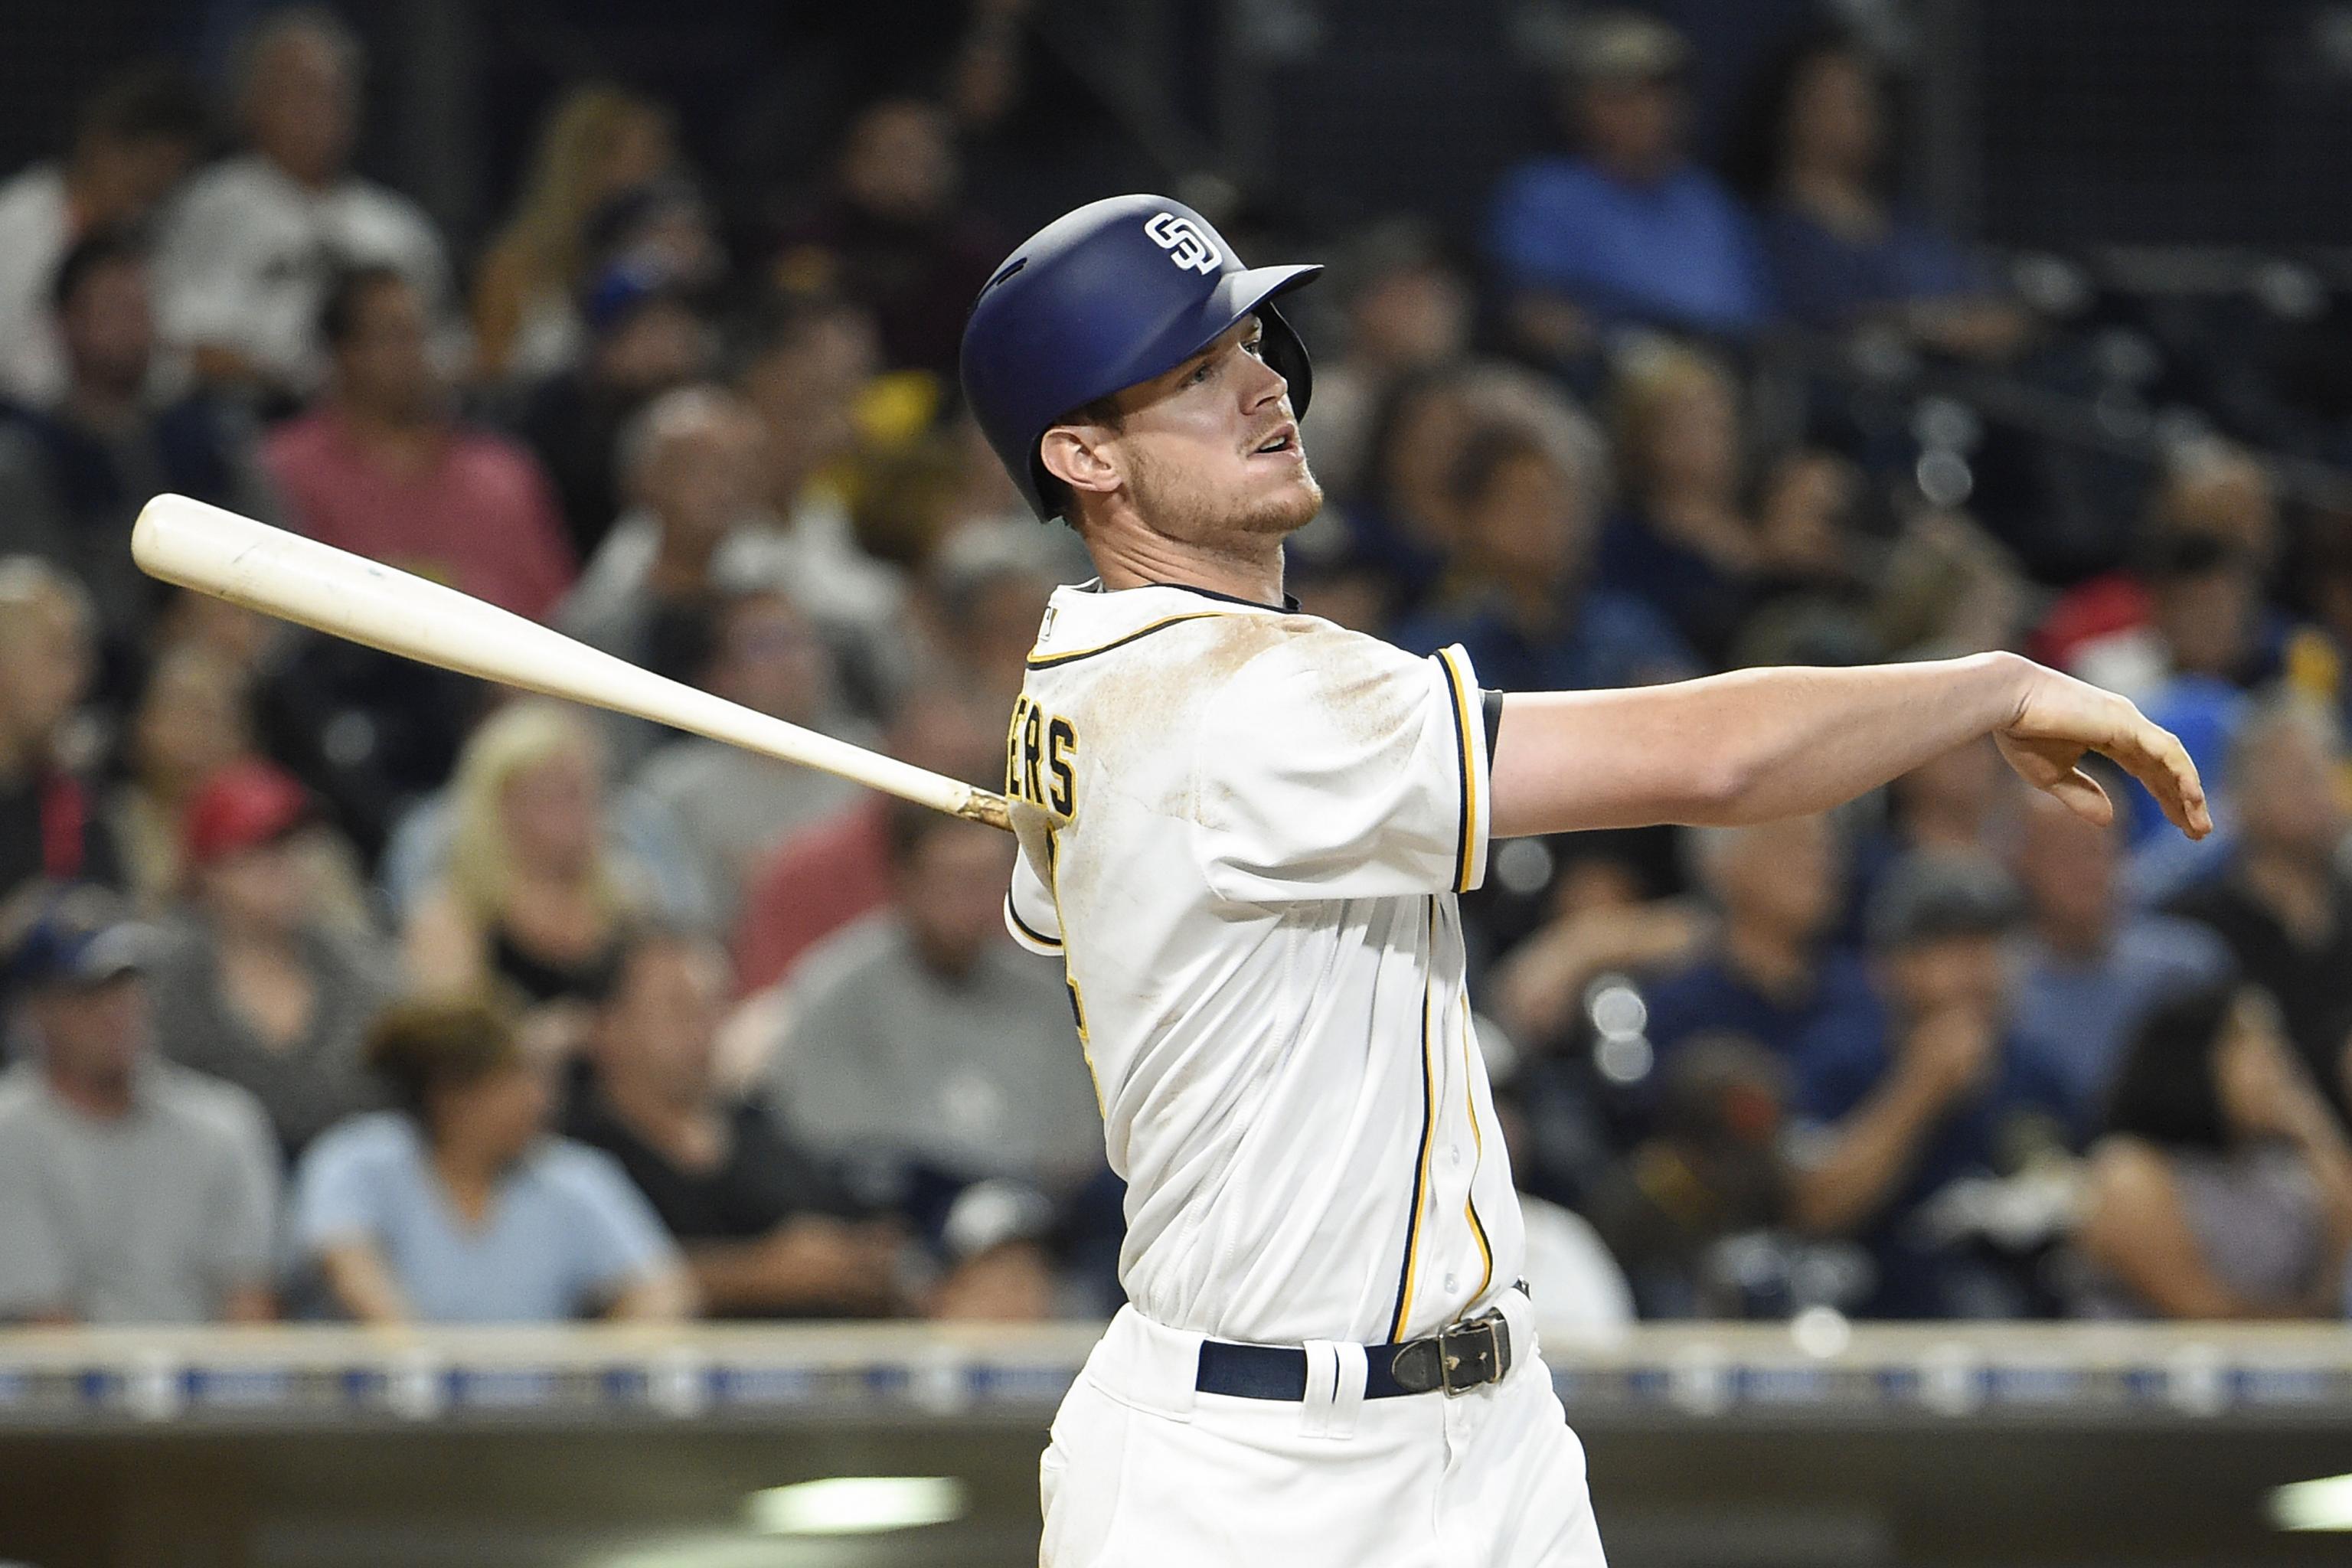 Former ALL-USA baseball player Wil Myers back in the groove with the Padres